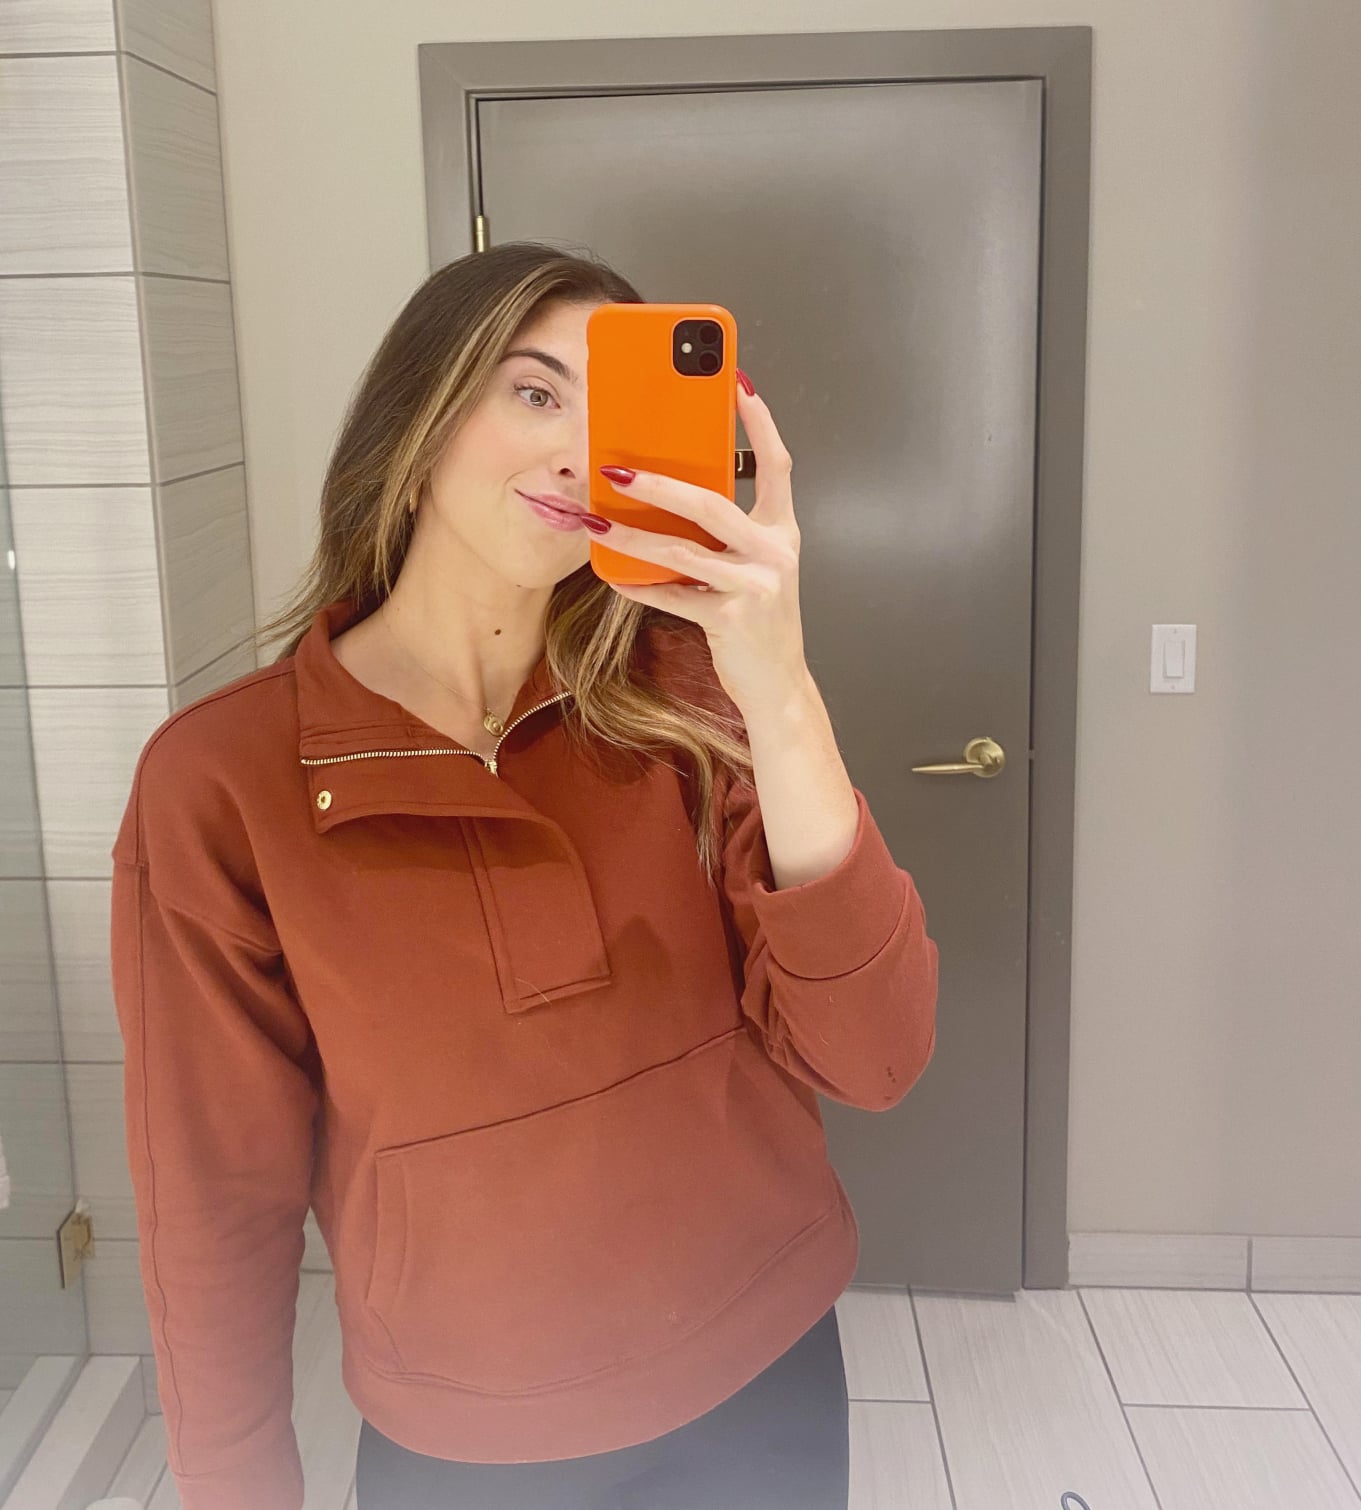 Target Shoppers Are Obsessed With This $18 Quarter-Zip, and So Am I